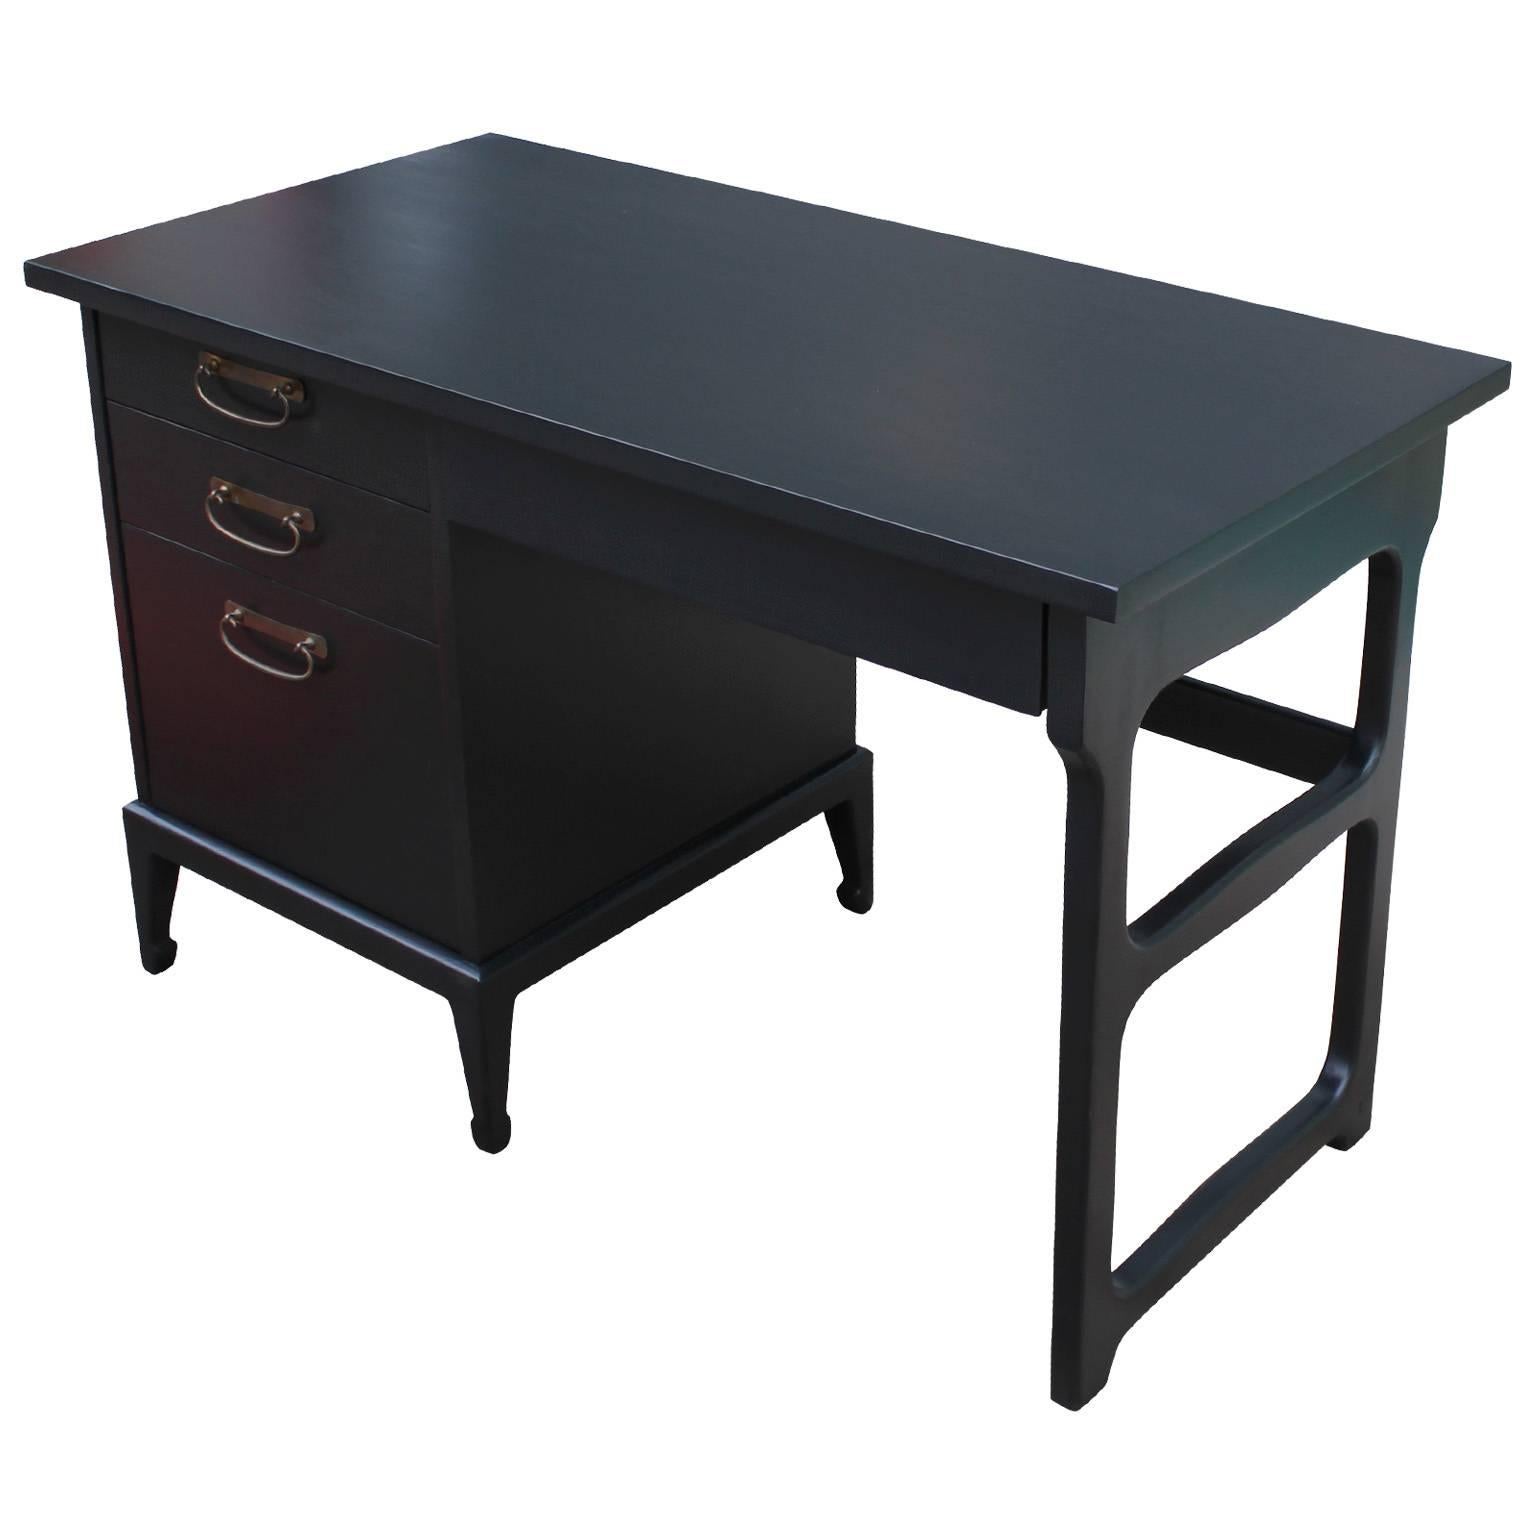 Elegant desk by American of Martinsville. Freshly finished in a deep ebony stain. Patinaed Brass hardware. Three drawers provide excellent storage.